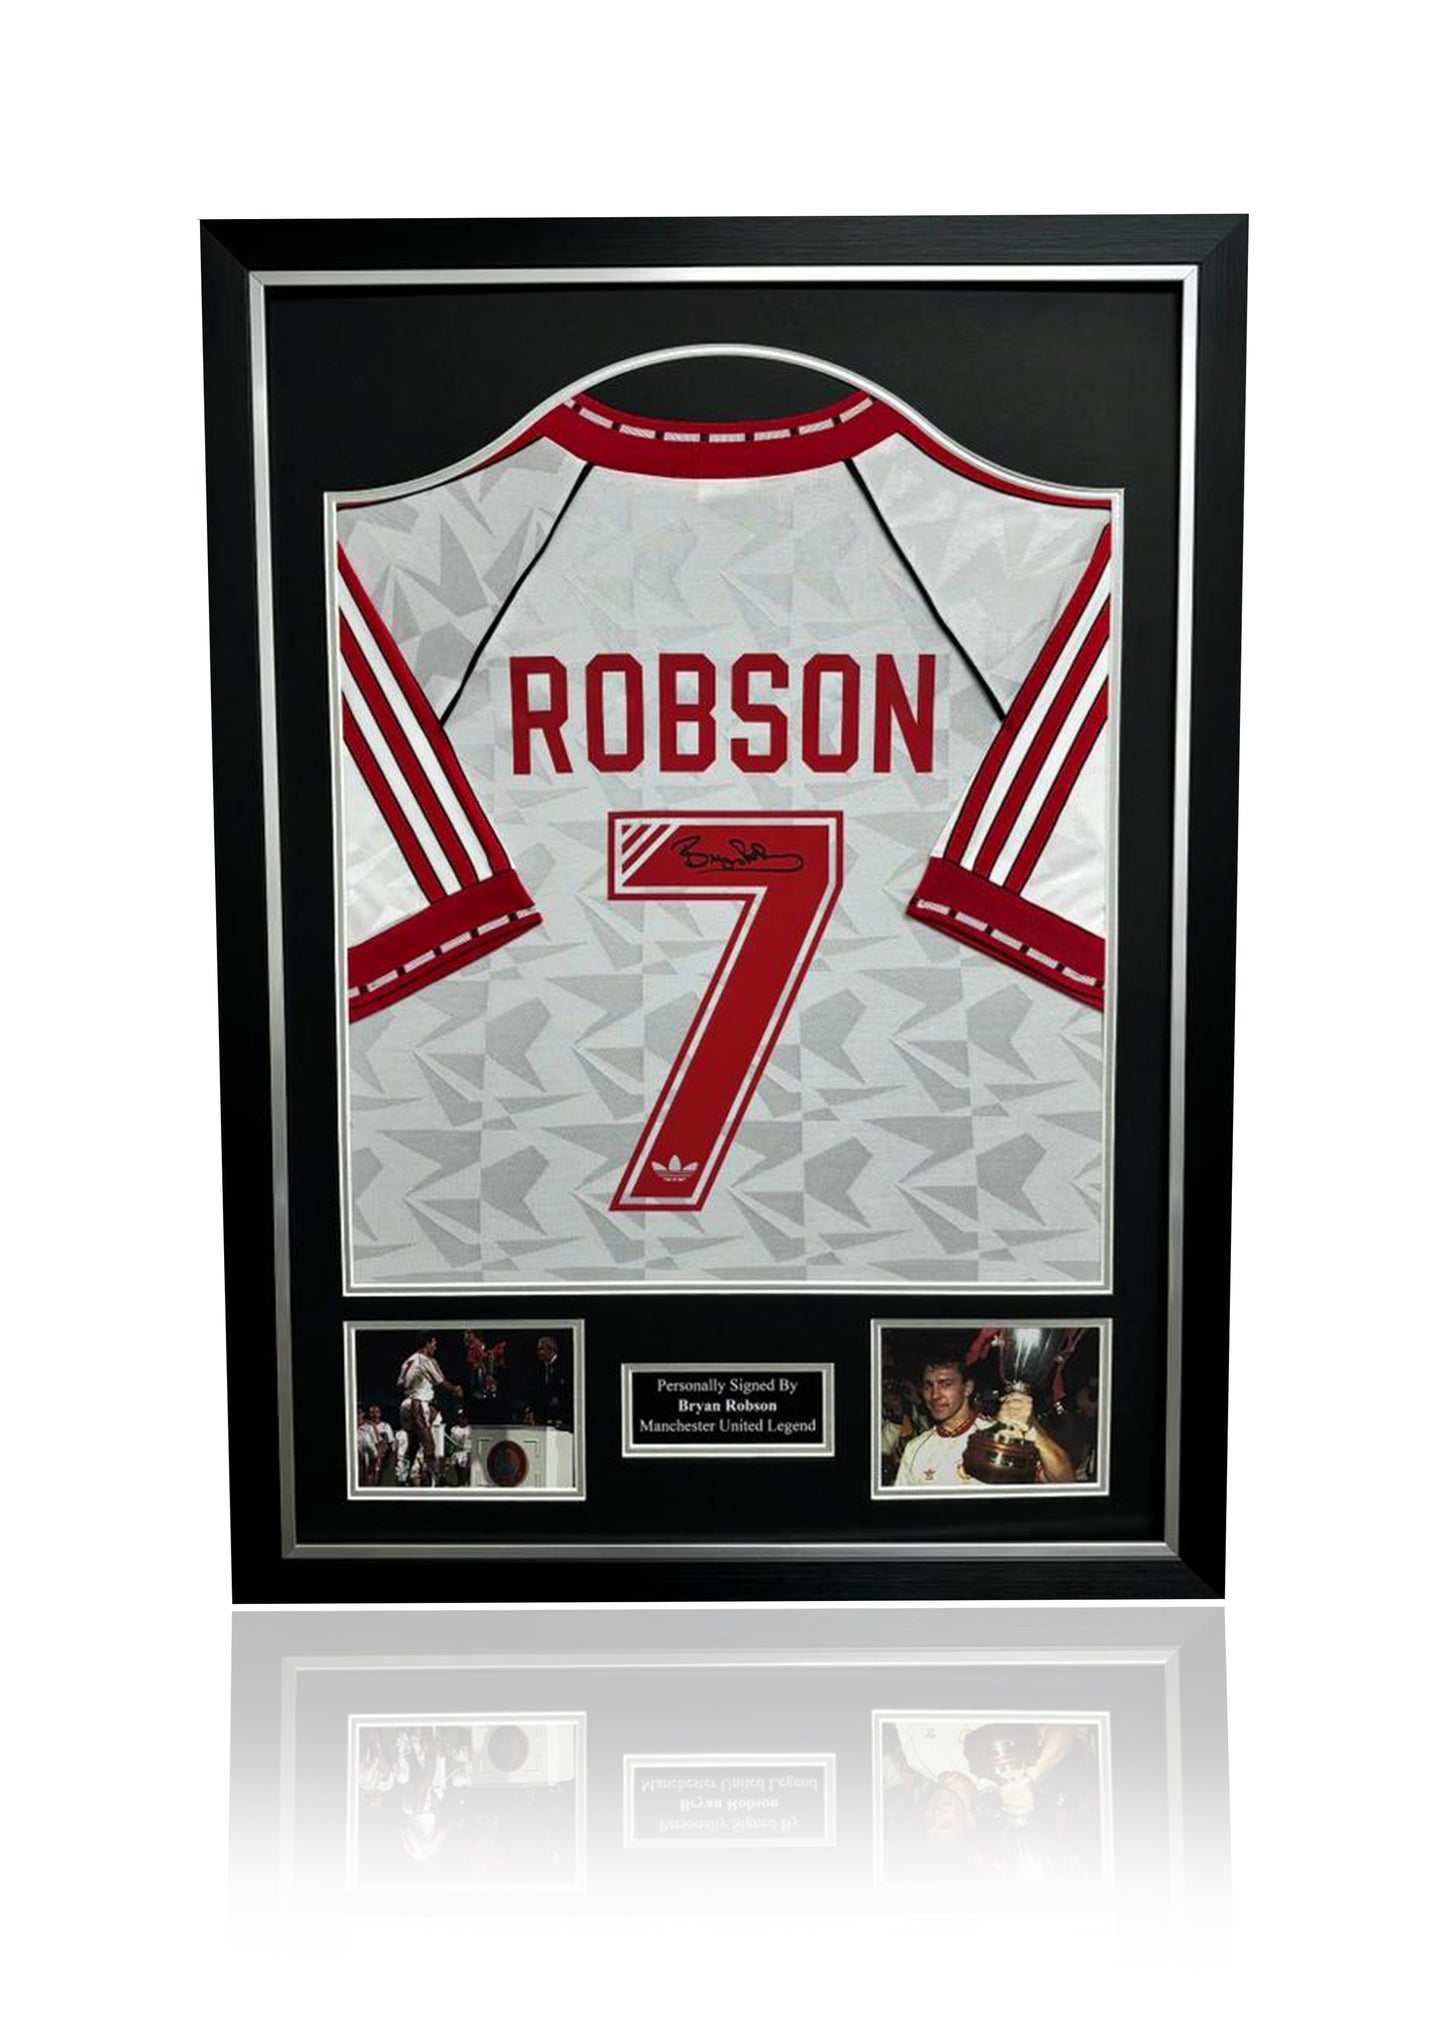 Bryan Robson framed signed Manchester United 1991 CWC cup winners cup shirt sleeves on show